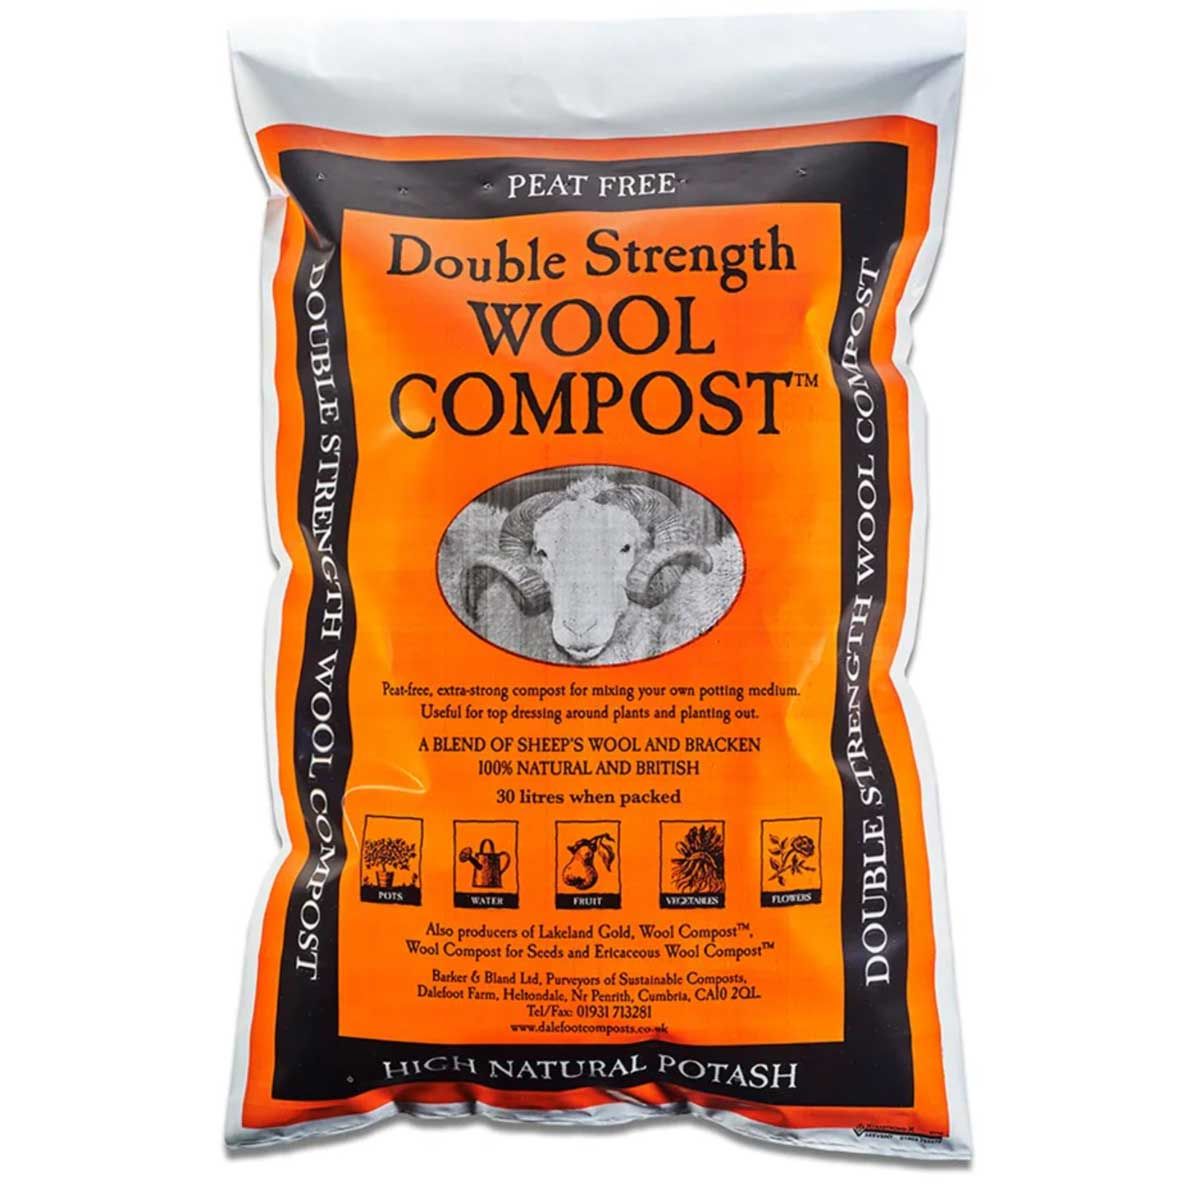 Double strength peat free wool compost